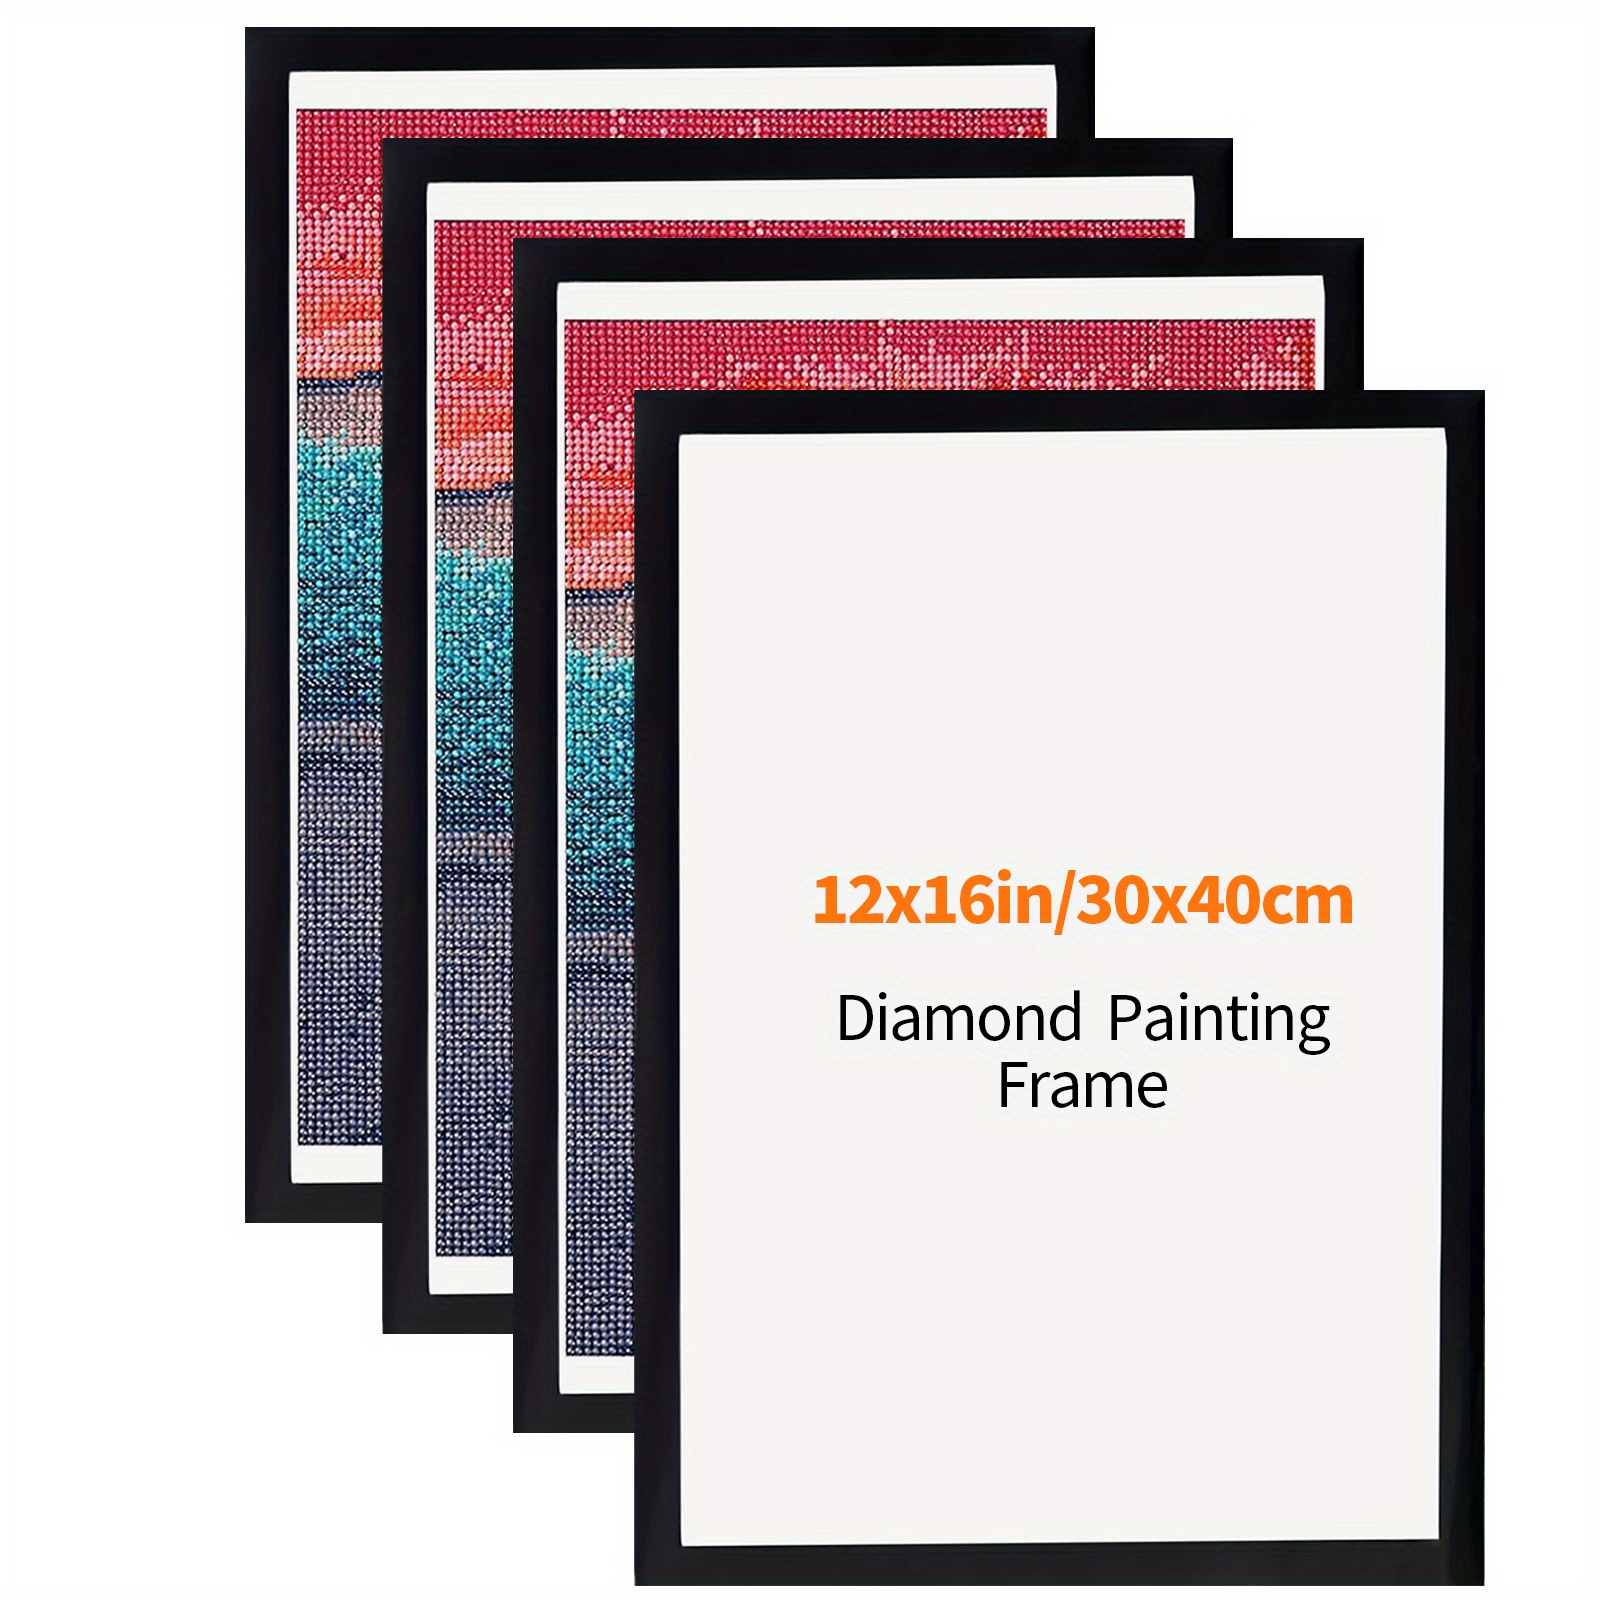 Magnetic Diamond Painting Frames 30x40cm. New PVC & Magnets diamond art  frame. Unique and creative 